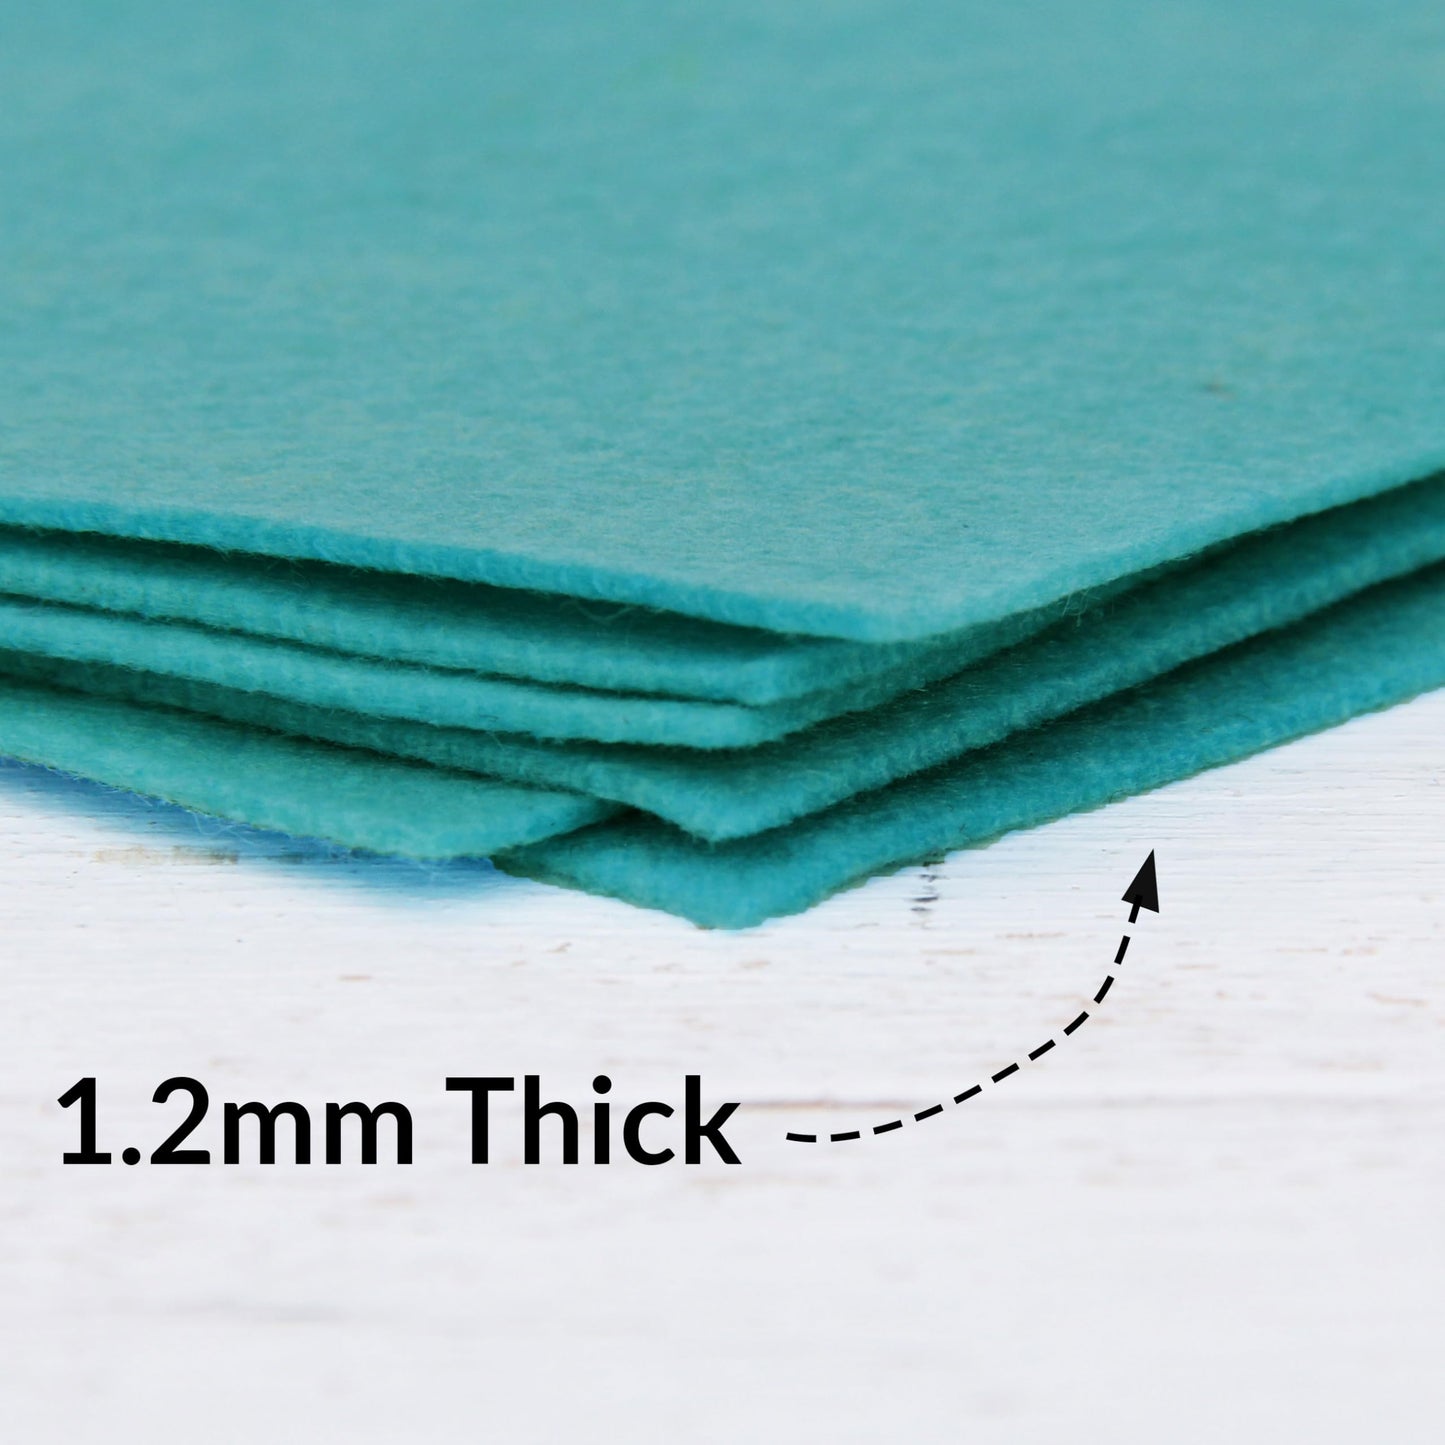 Threadart Premium Felt Sheets - 10 Sheets - 12" x 12" - Teal | Soft Wool-Like Feel | 1.2mm Thick Fabric for DIY Crafts, Sewing, Crafting Projects | Compatible with Cricut Maker